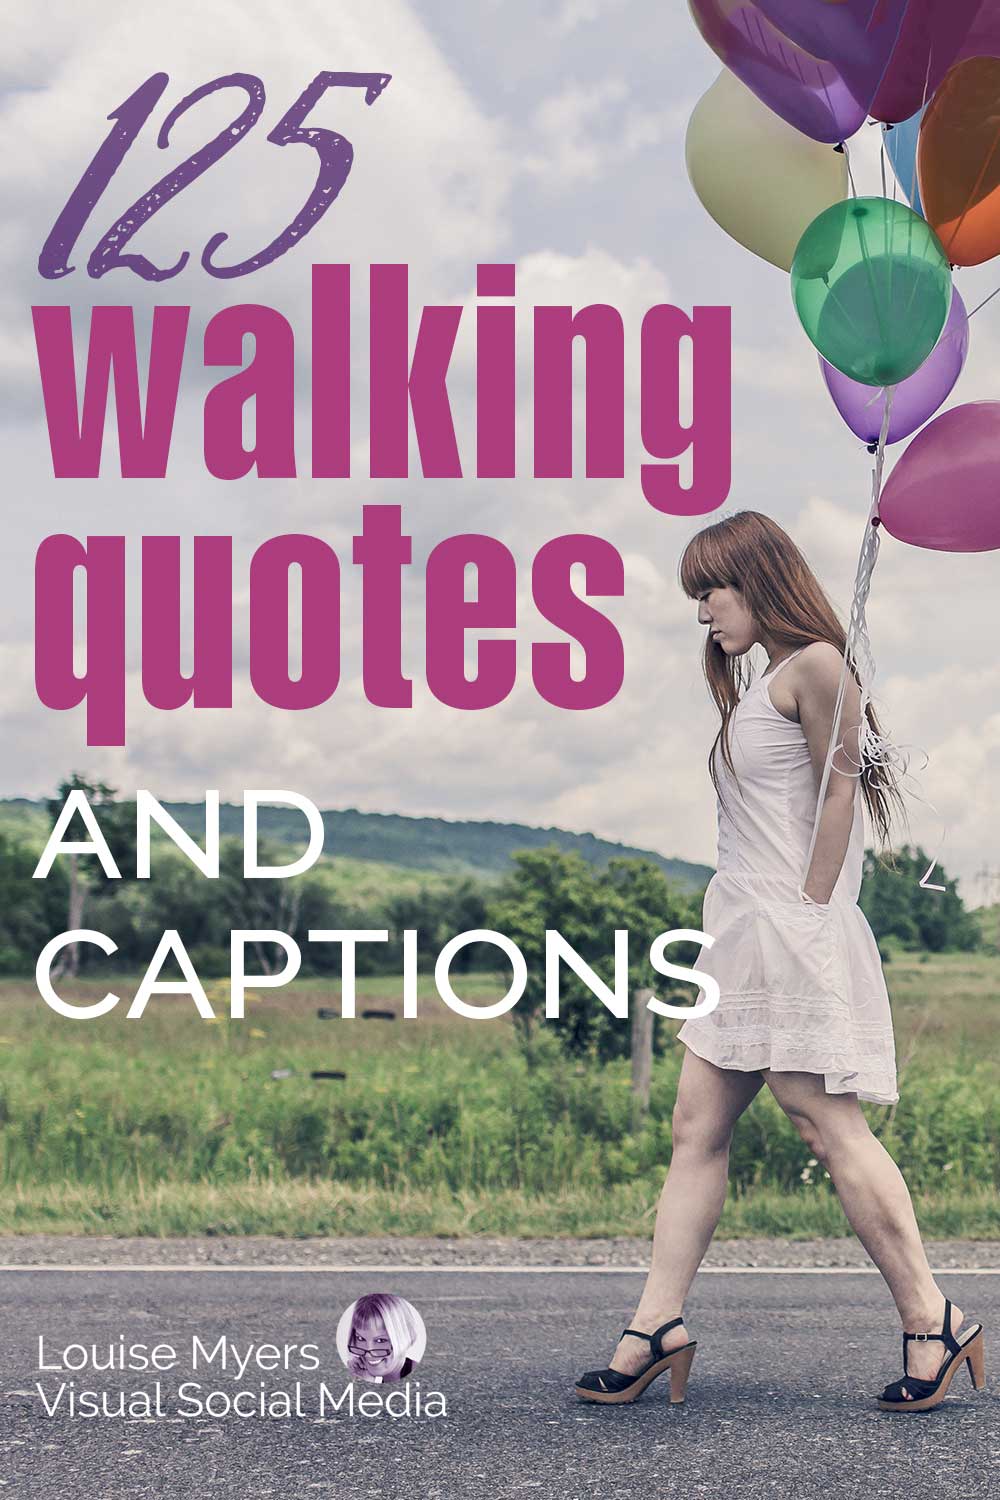 woman walking with balloons has words 125 walking quotes and captions.